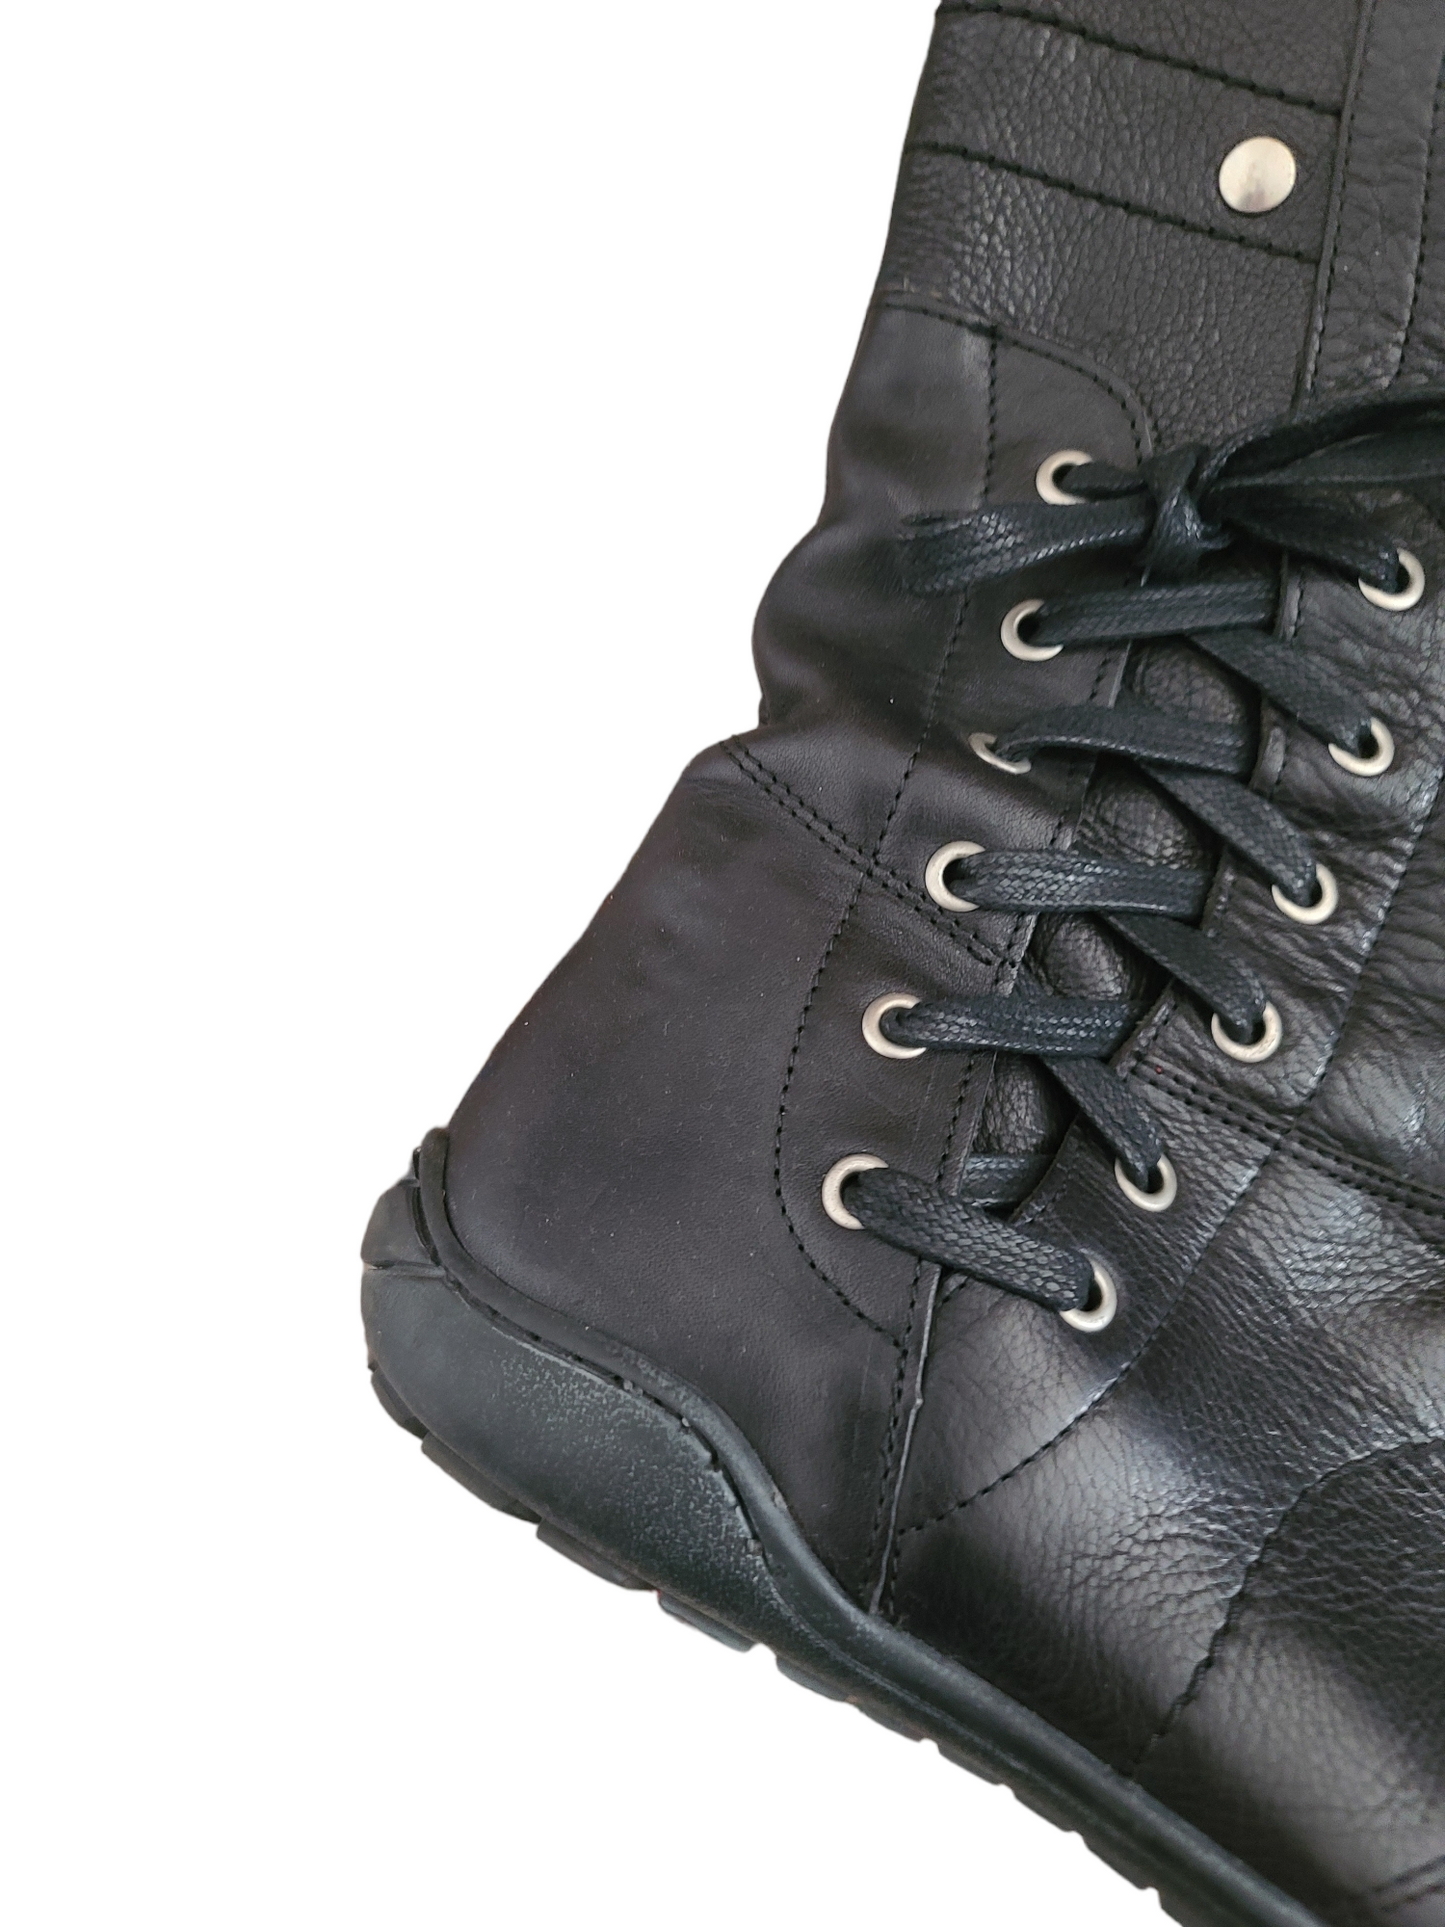 Boxer cybery2k lace up boots